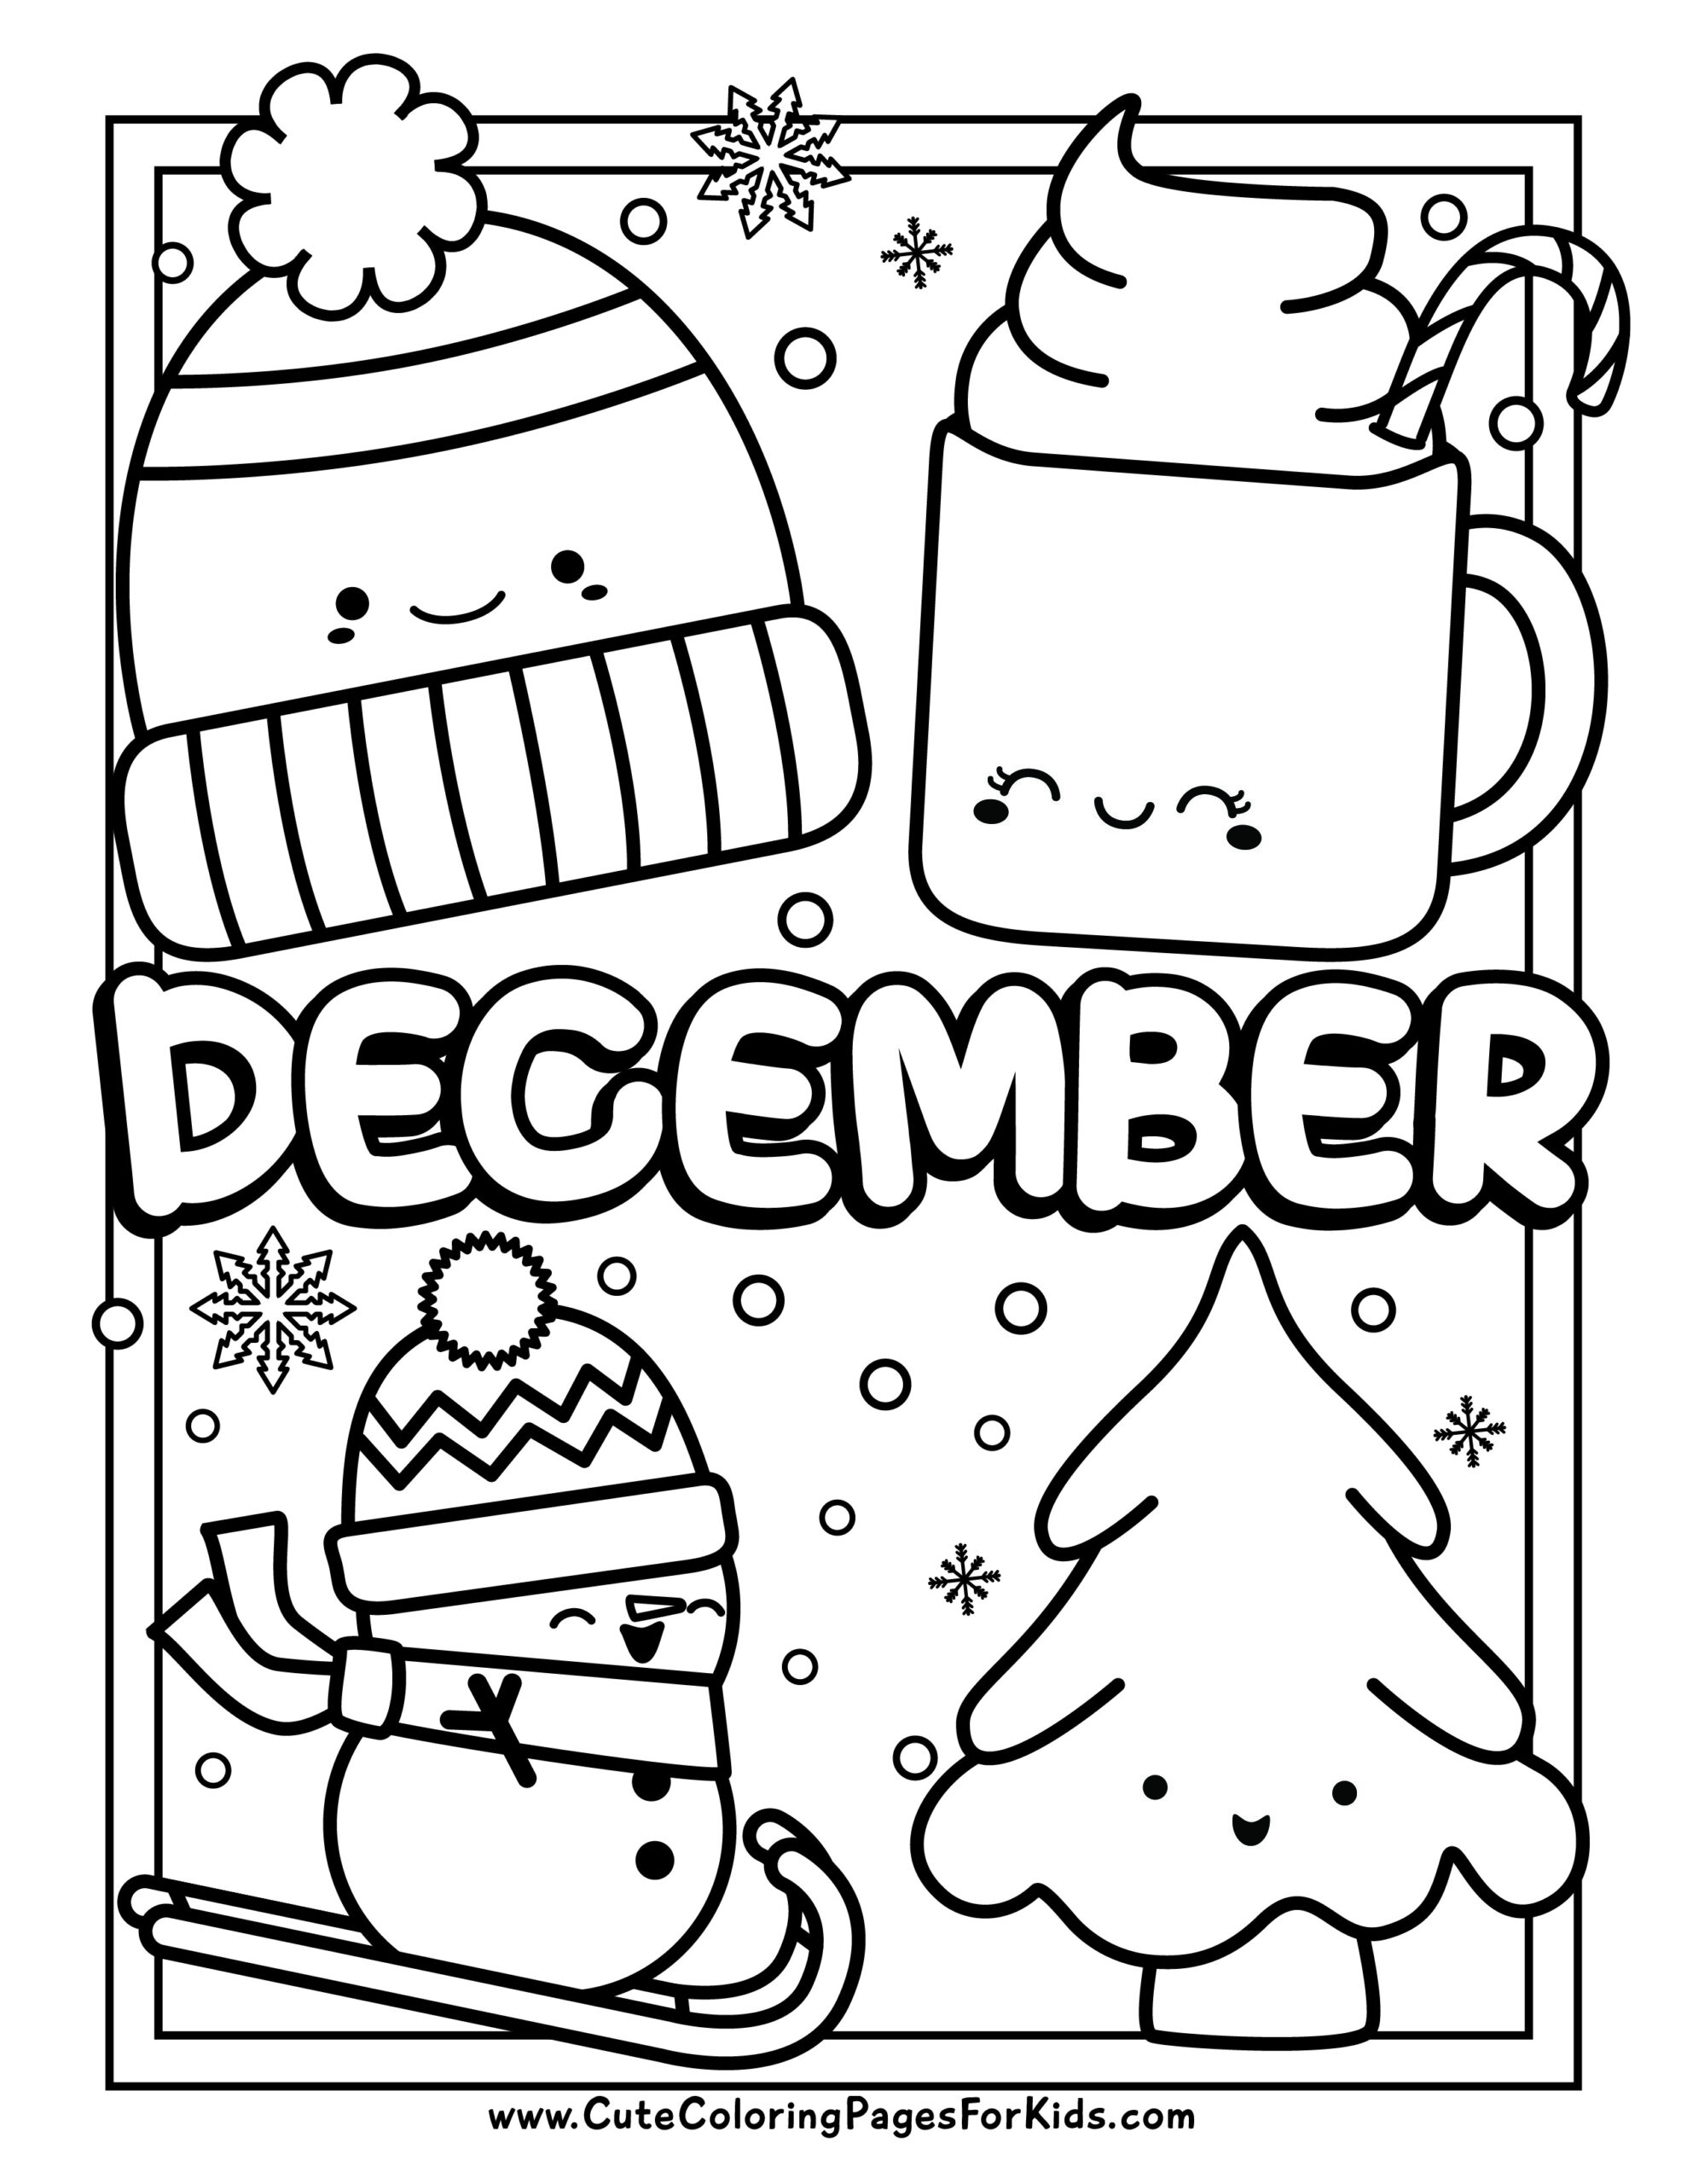 https://www.cutecoloringpagesforkids.com/wp-content/uploads/2023/09/December-Coloring-Pages-01-1-scaled.jpg